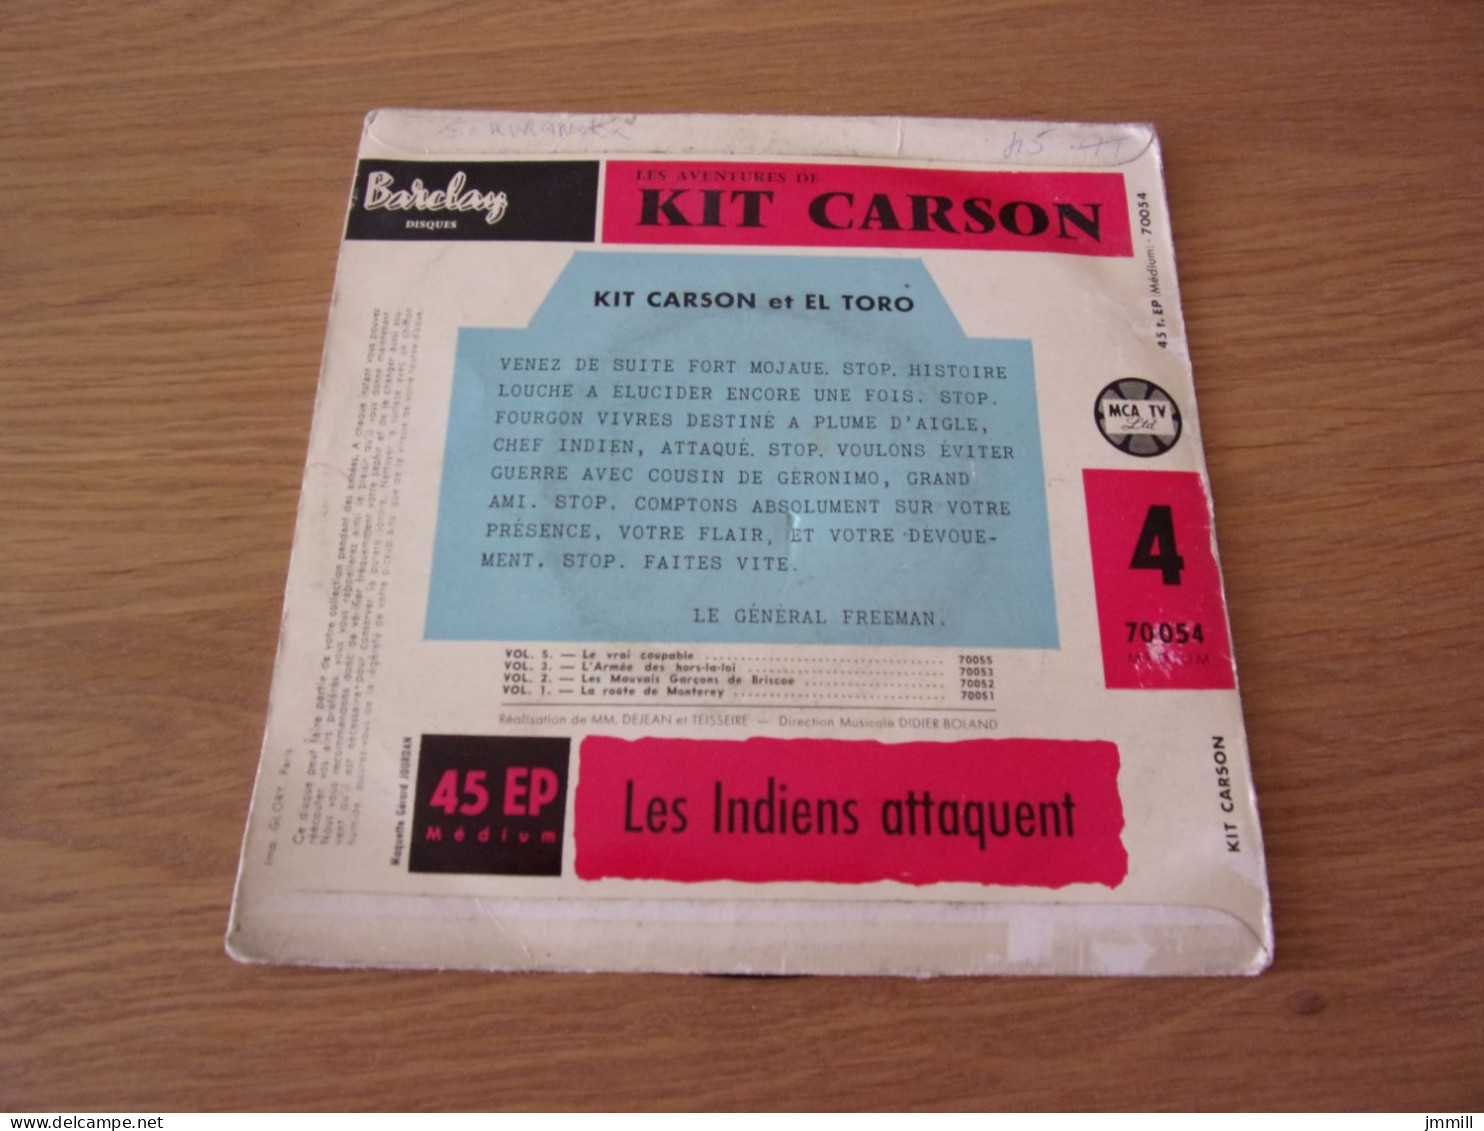 Kit Carson 4 Les Indiens Attaquent Disque 45 Tours Barclay - Disques & CD